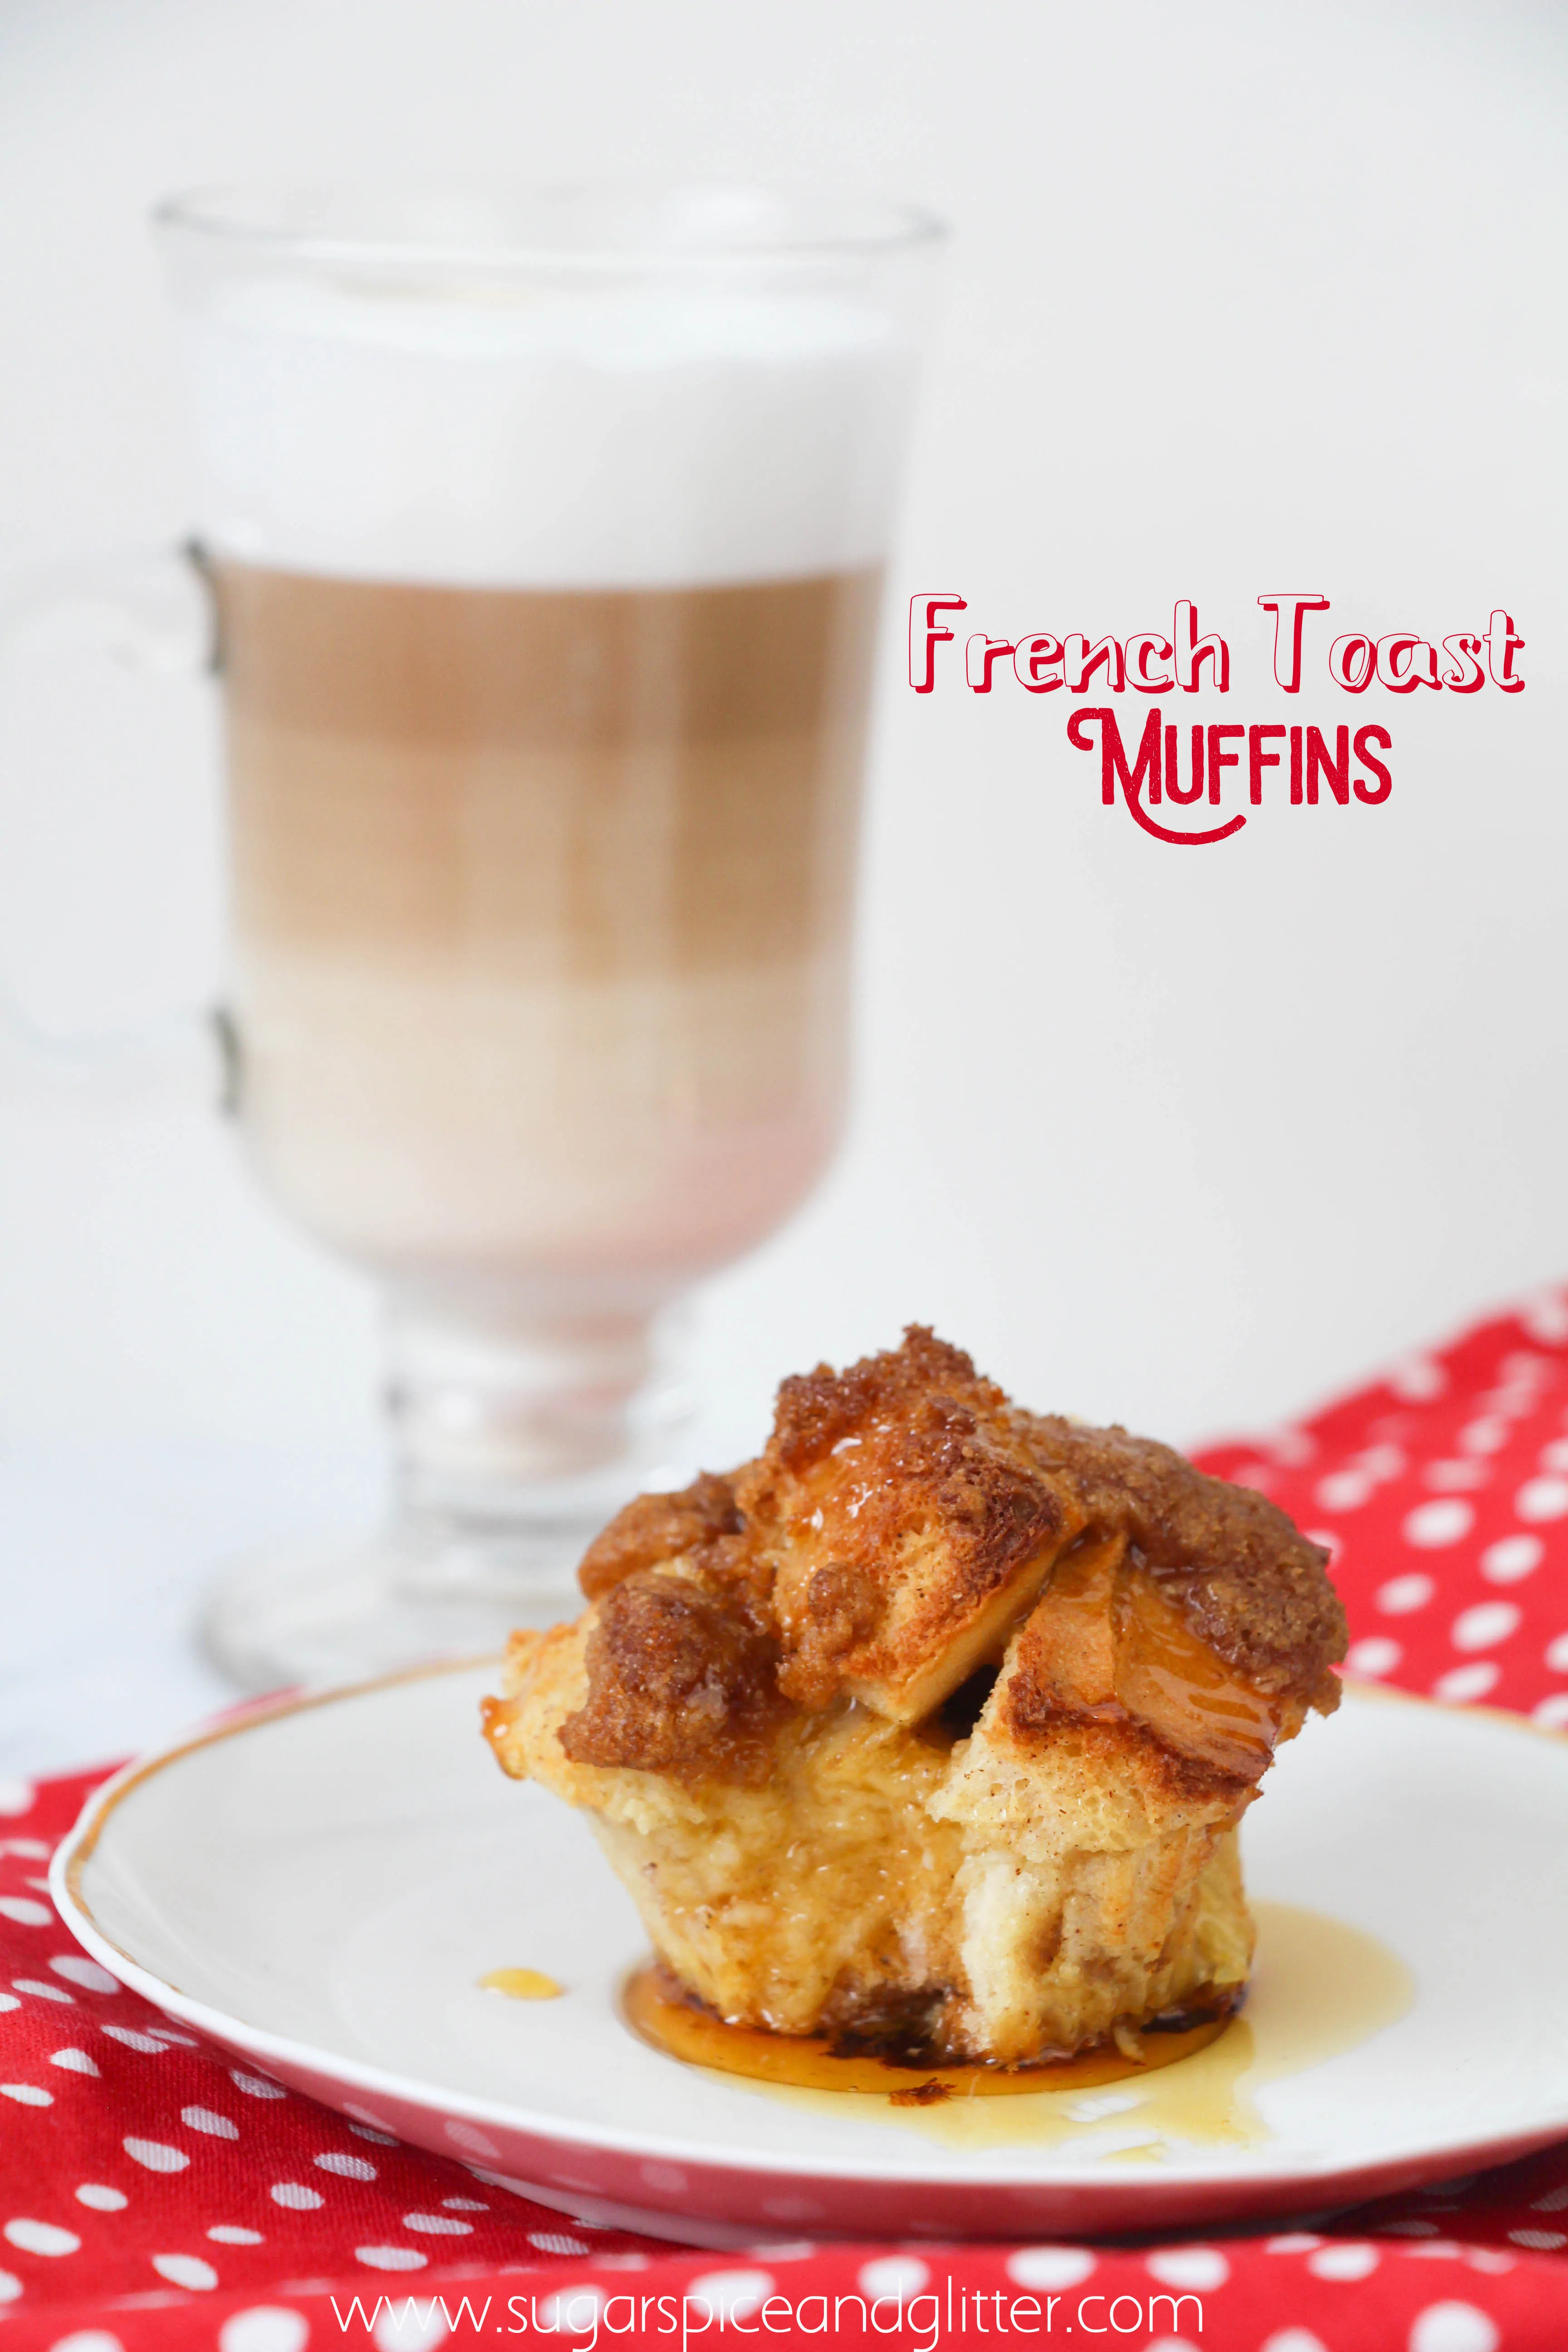 Perfect French Toast Muffins with a crunchy-sweet crumb topping, these easy breakfast muffins are a fun twist on French Toast that you can take on-the-go ad